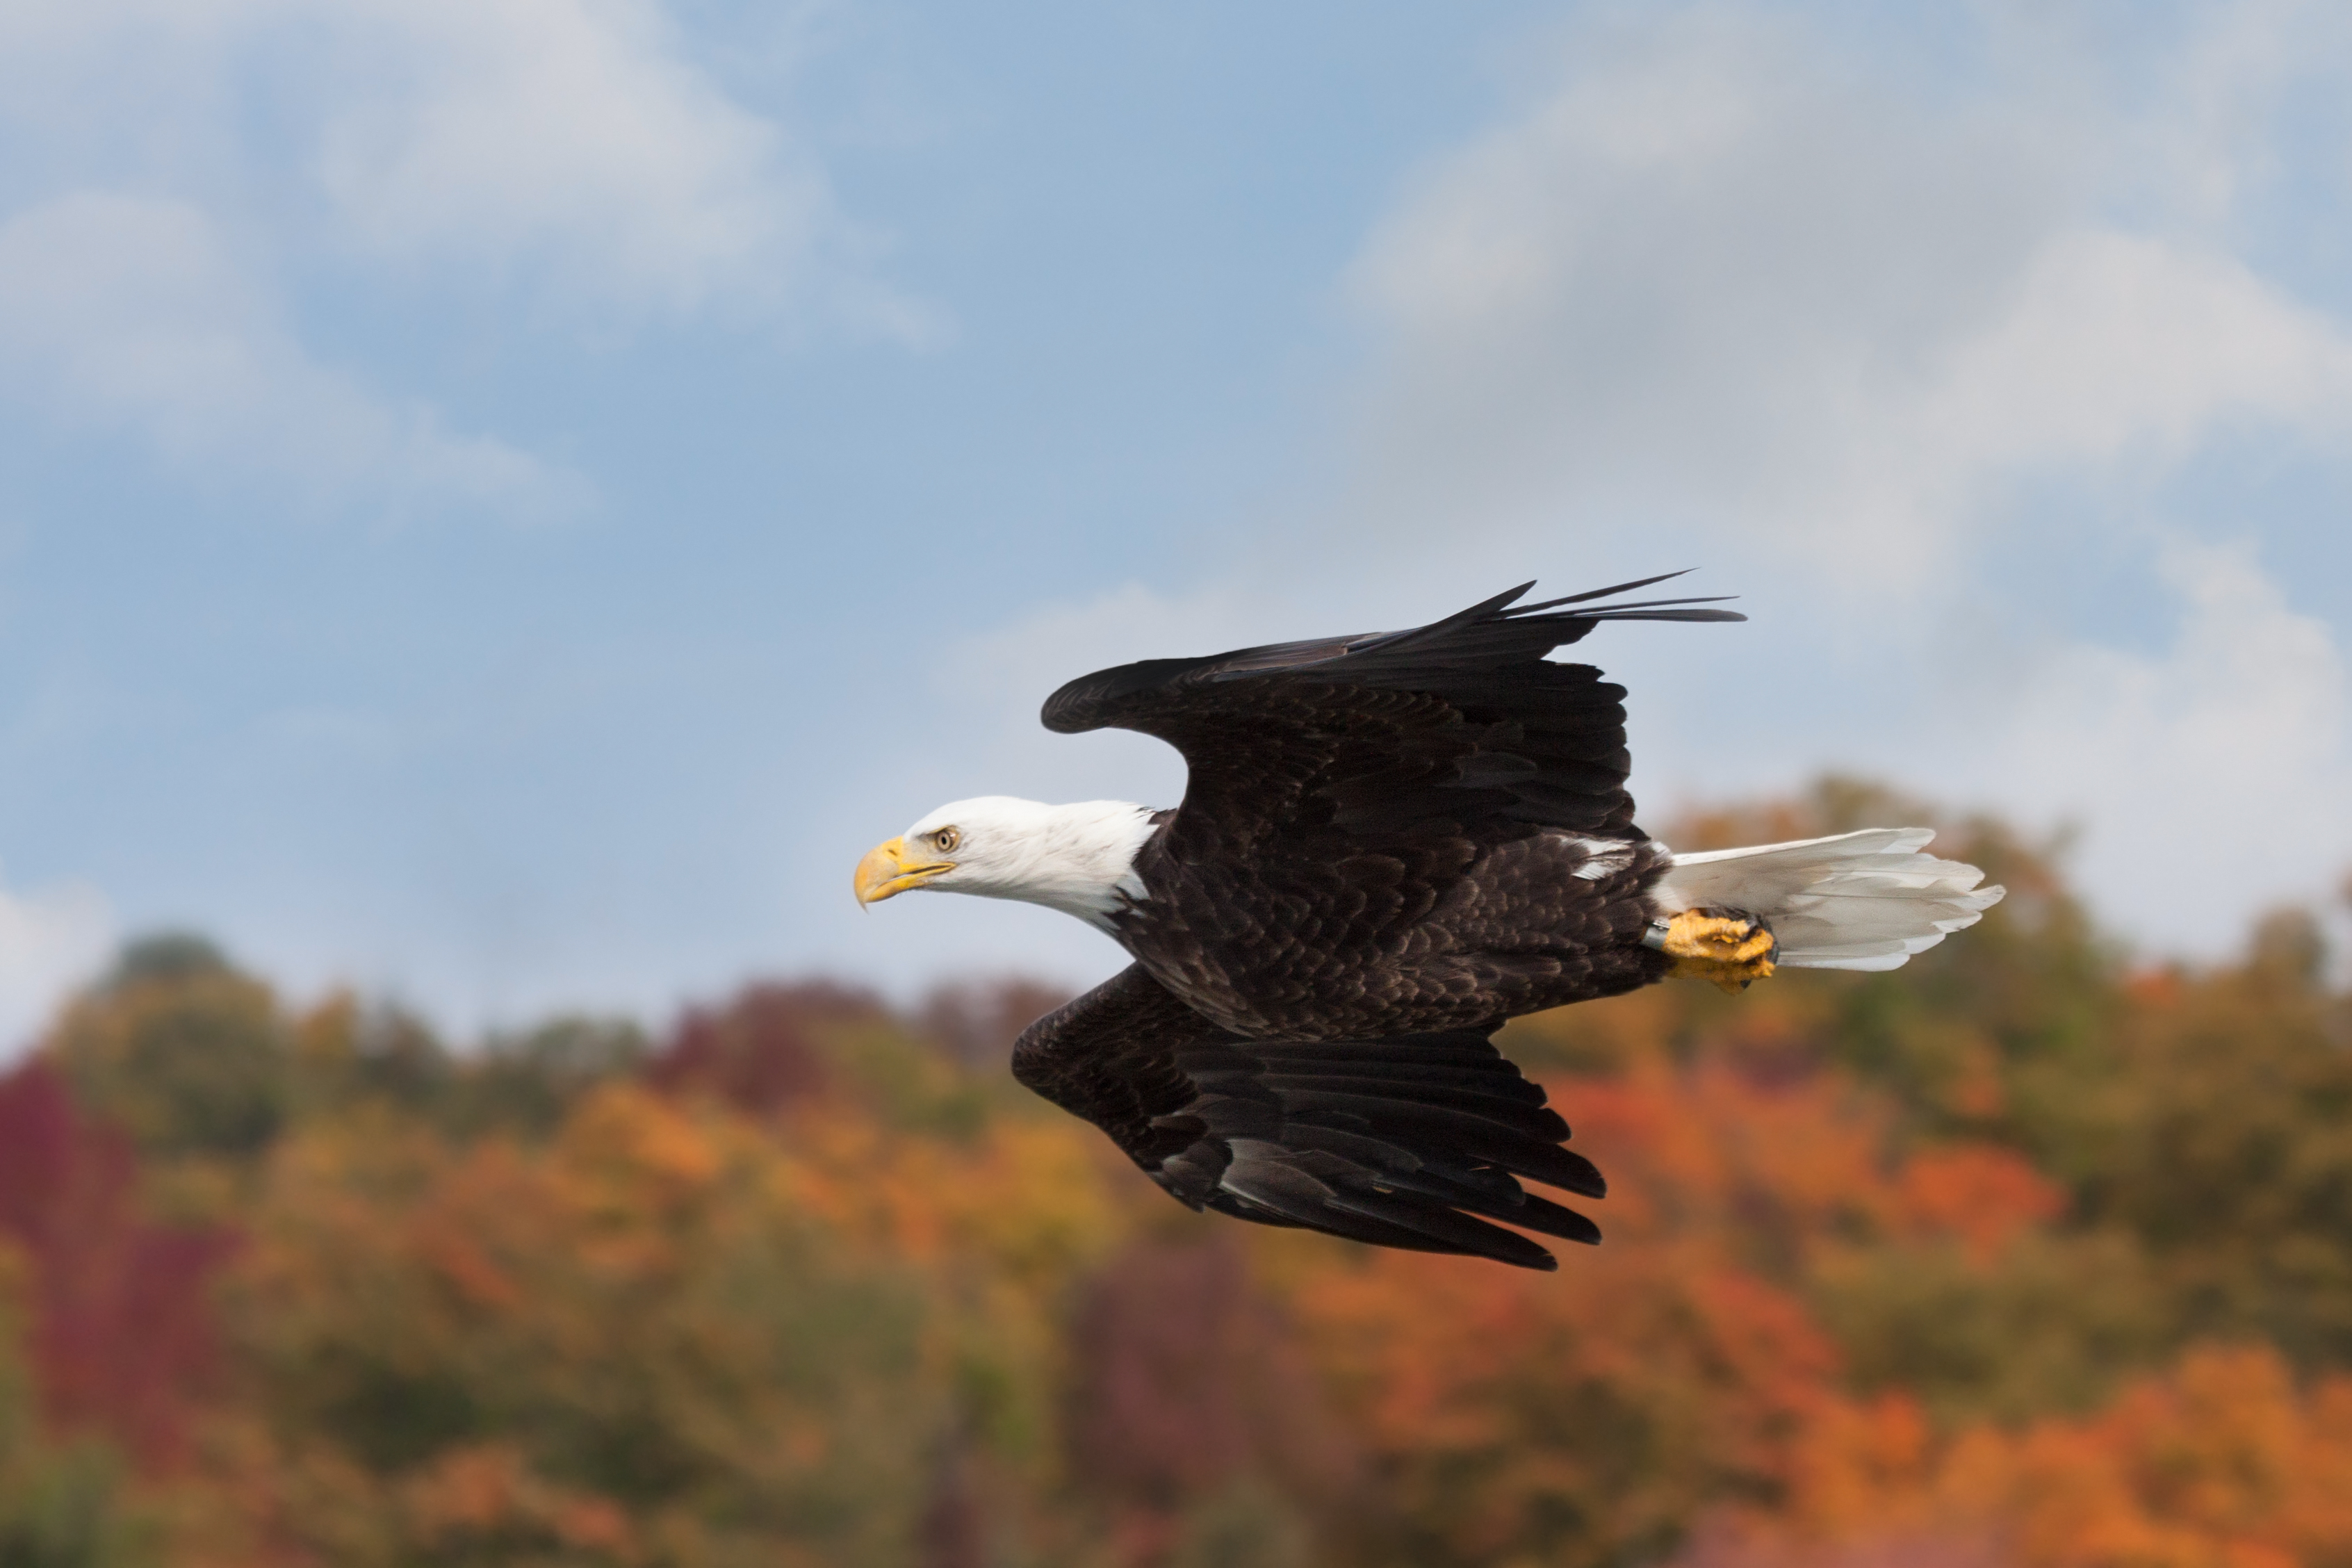 Bald eagle soaring above autumnal trees in a nature preserve